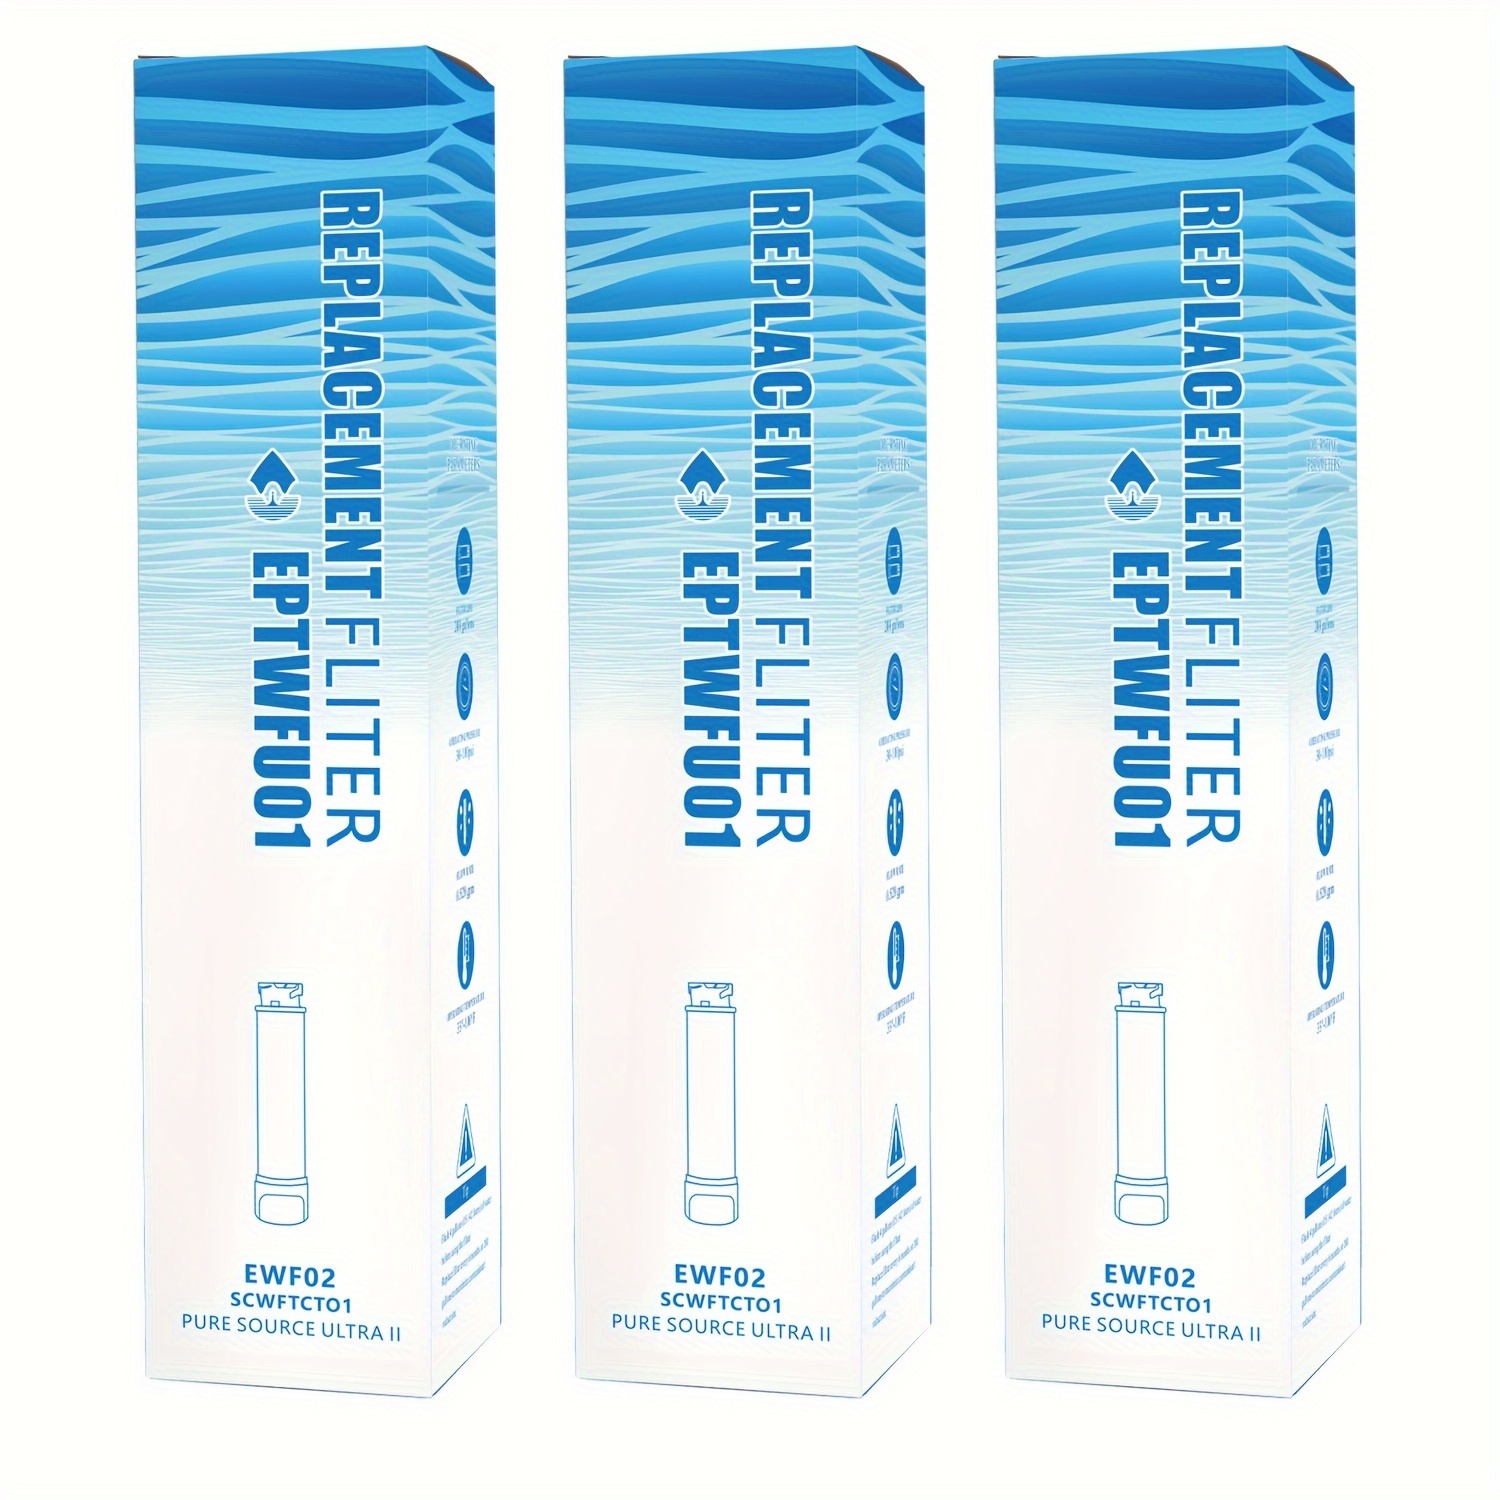 

3pcs Eptwfuo1 Ewfo2 Refrigerator Water Filters, Replace Every 200 Gallons Or 6 Months